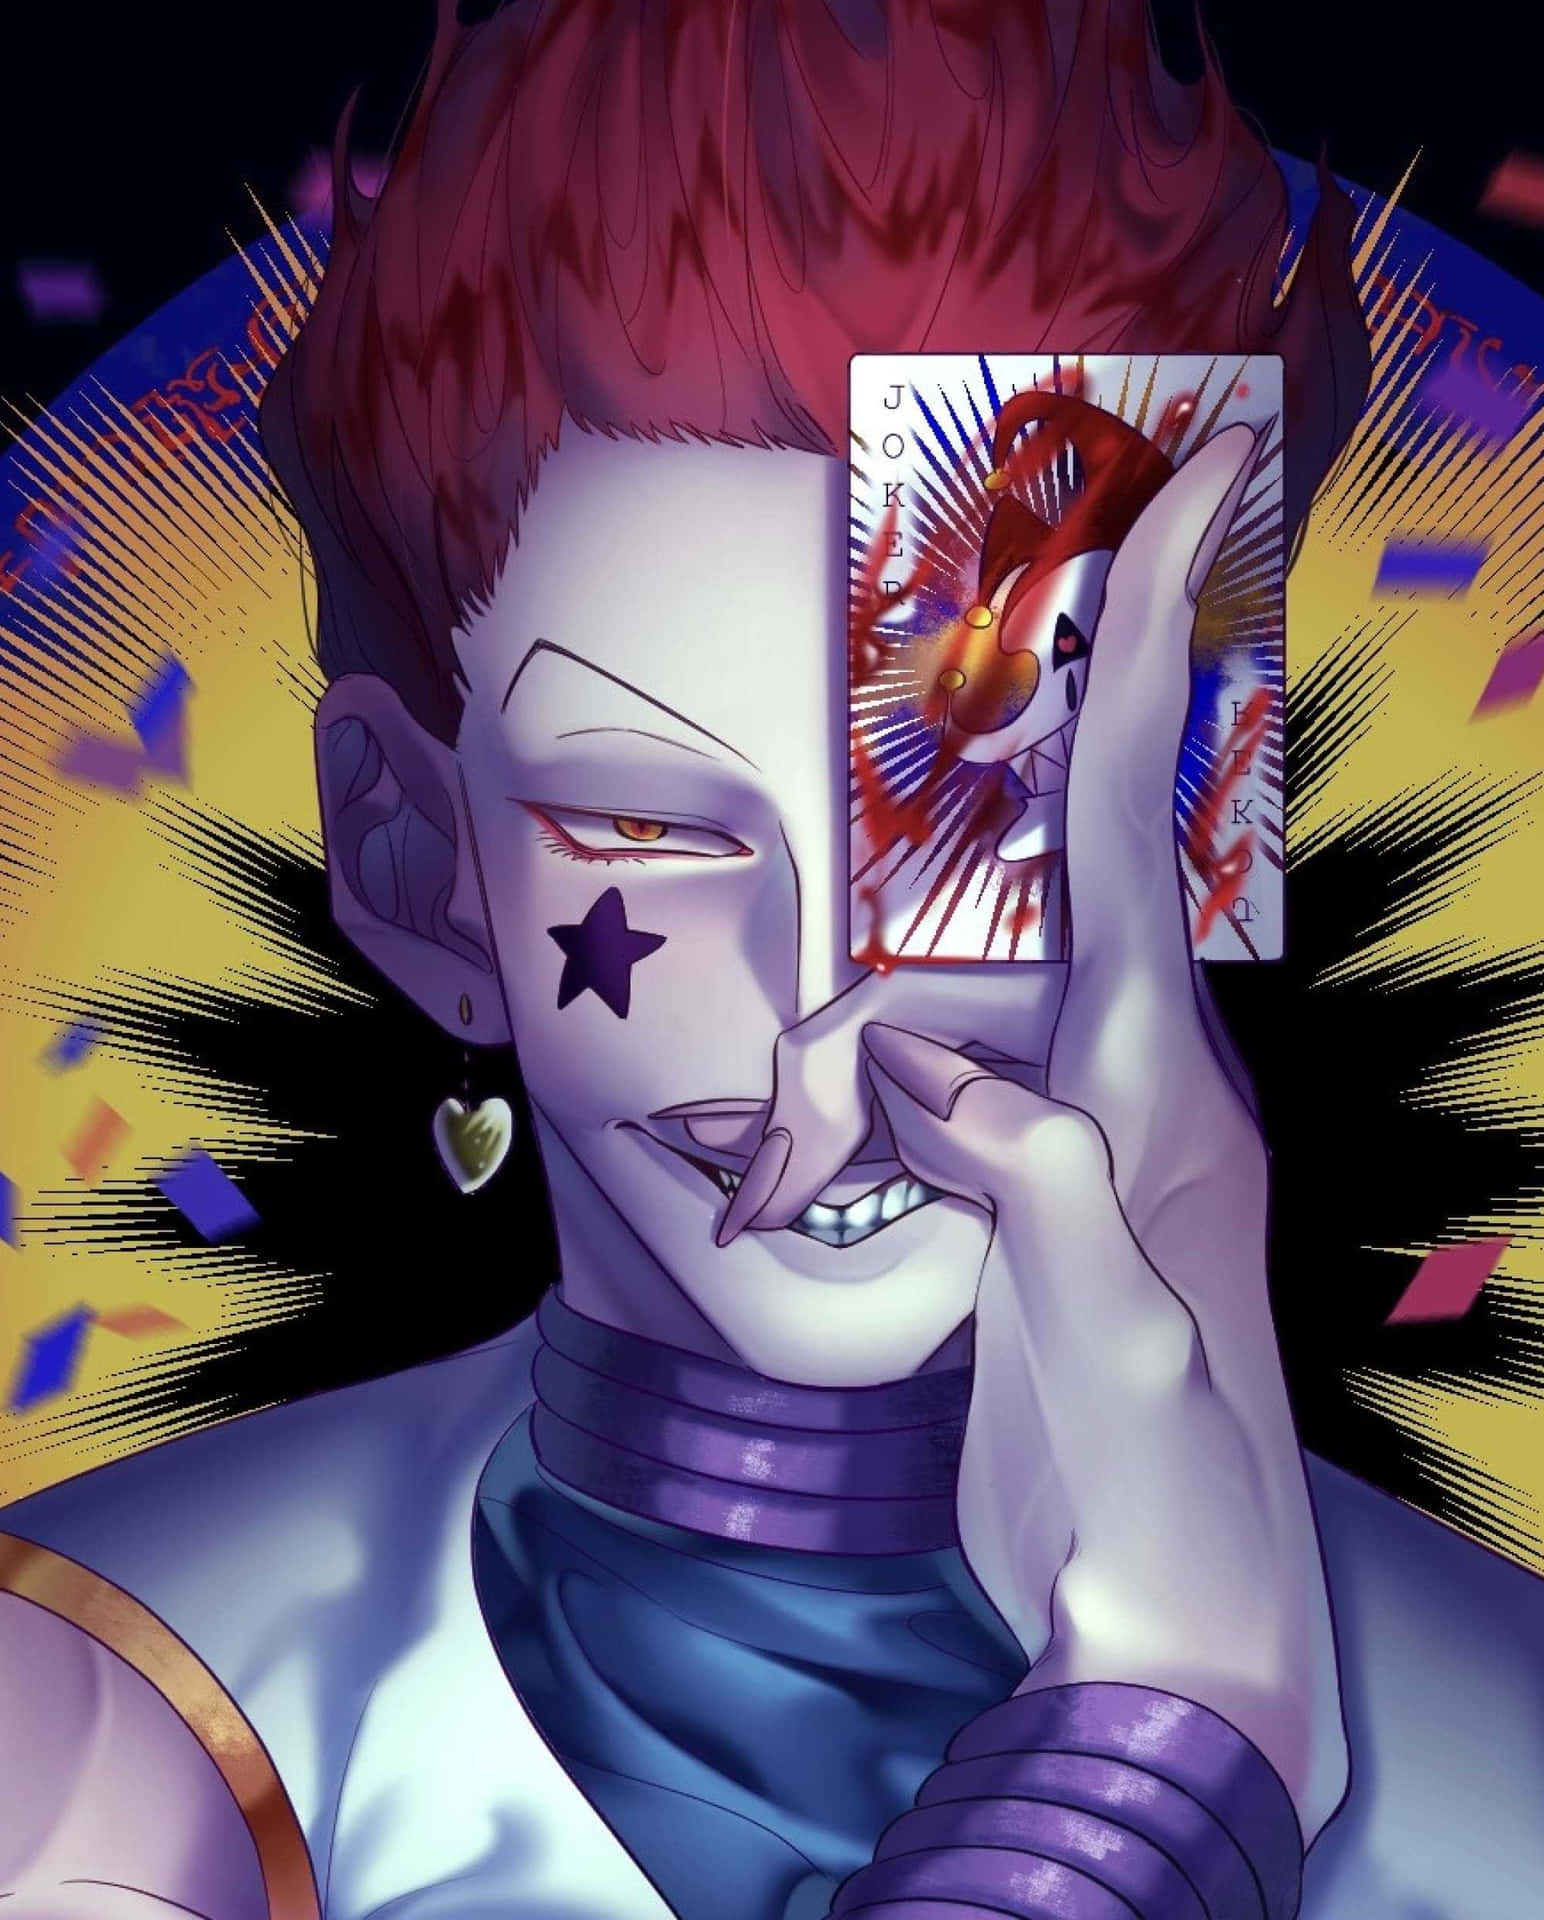 A Character With Red Hair Holding A Card